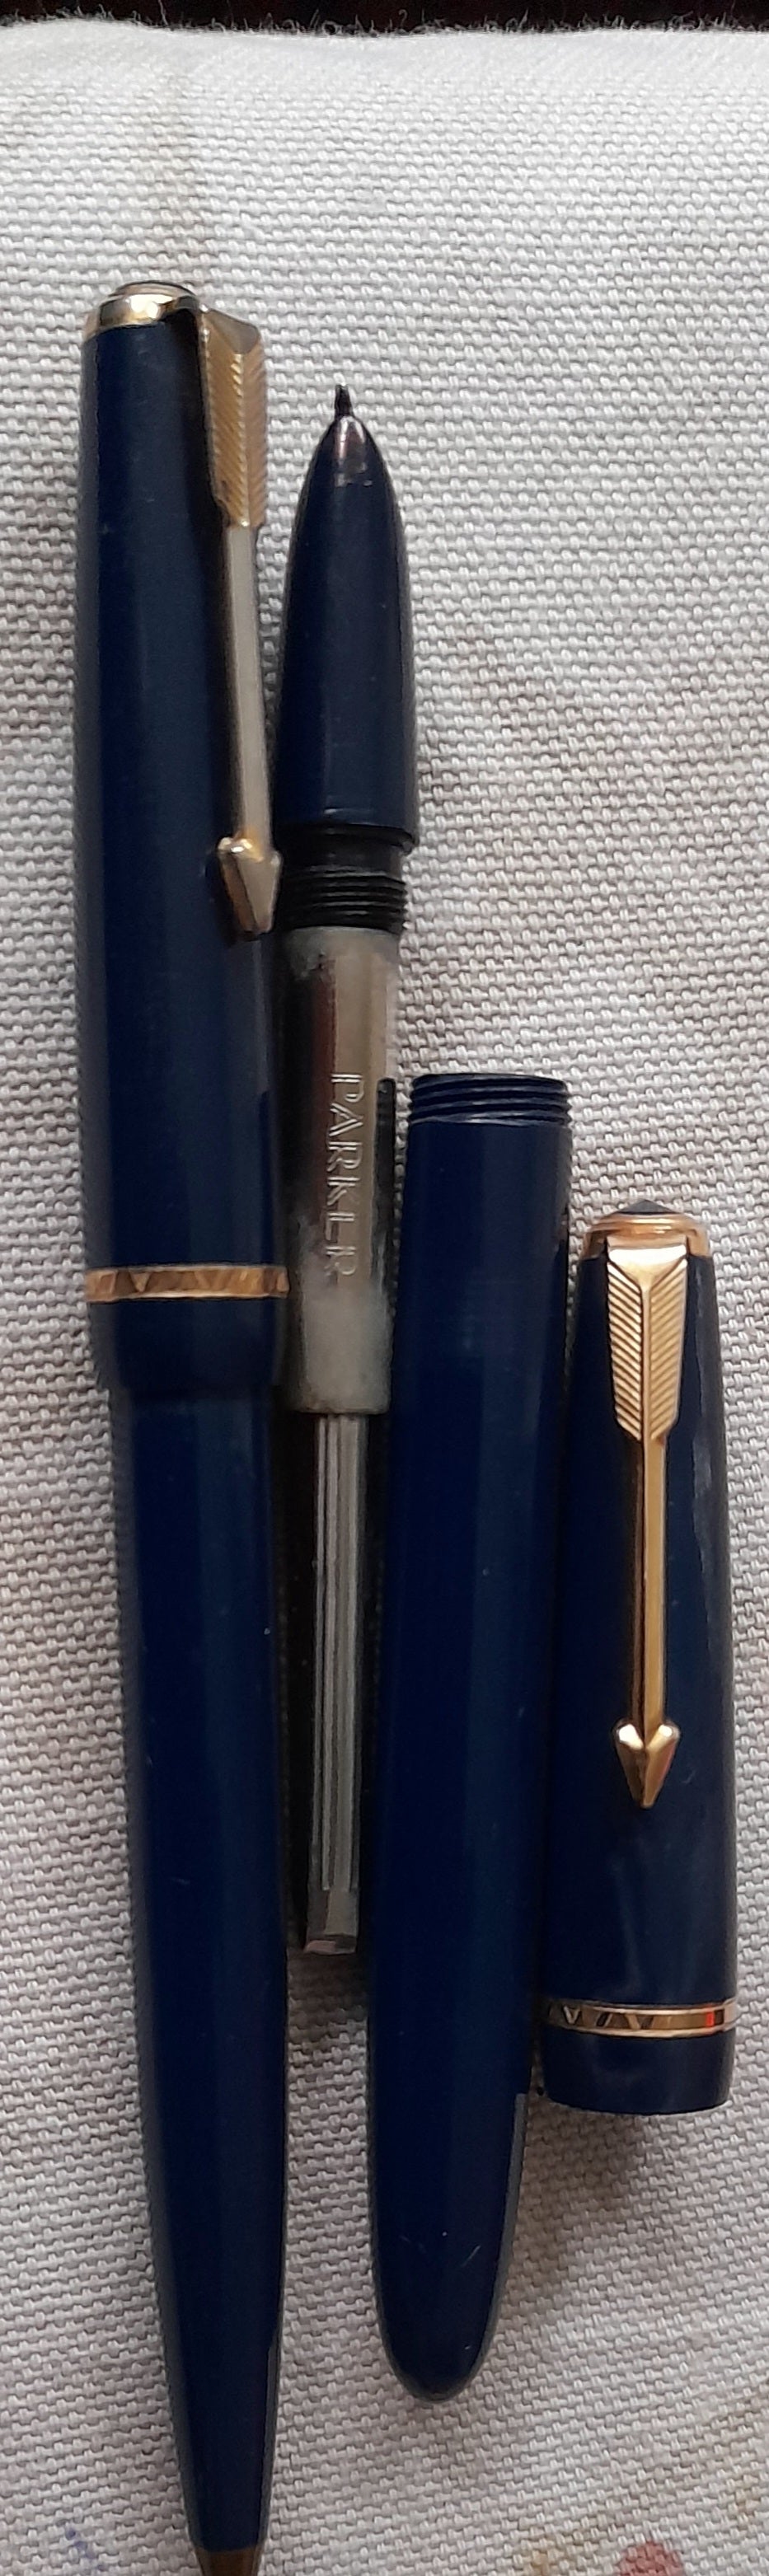 Parker Slimfold Blue Fountain Pen and Pencil